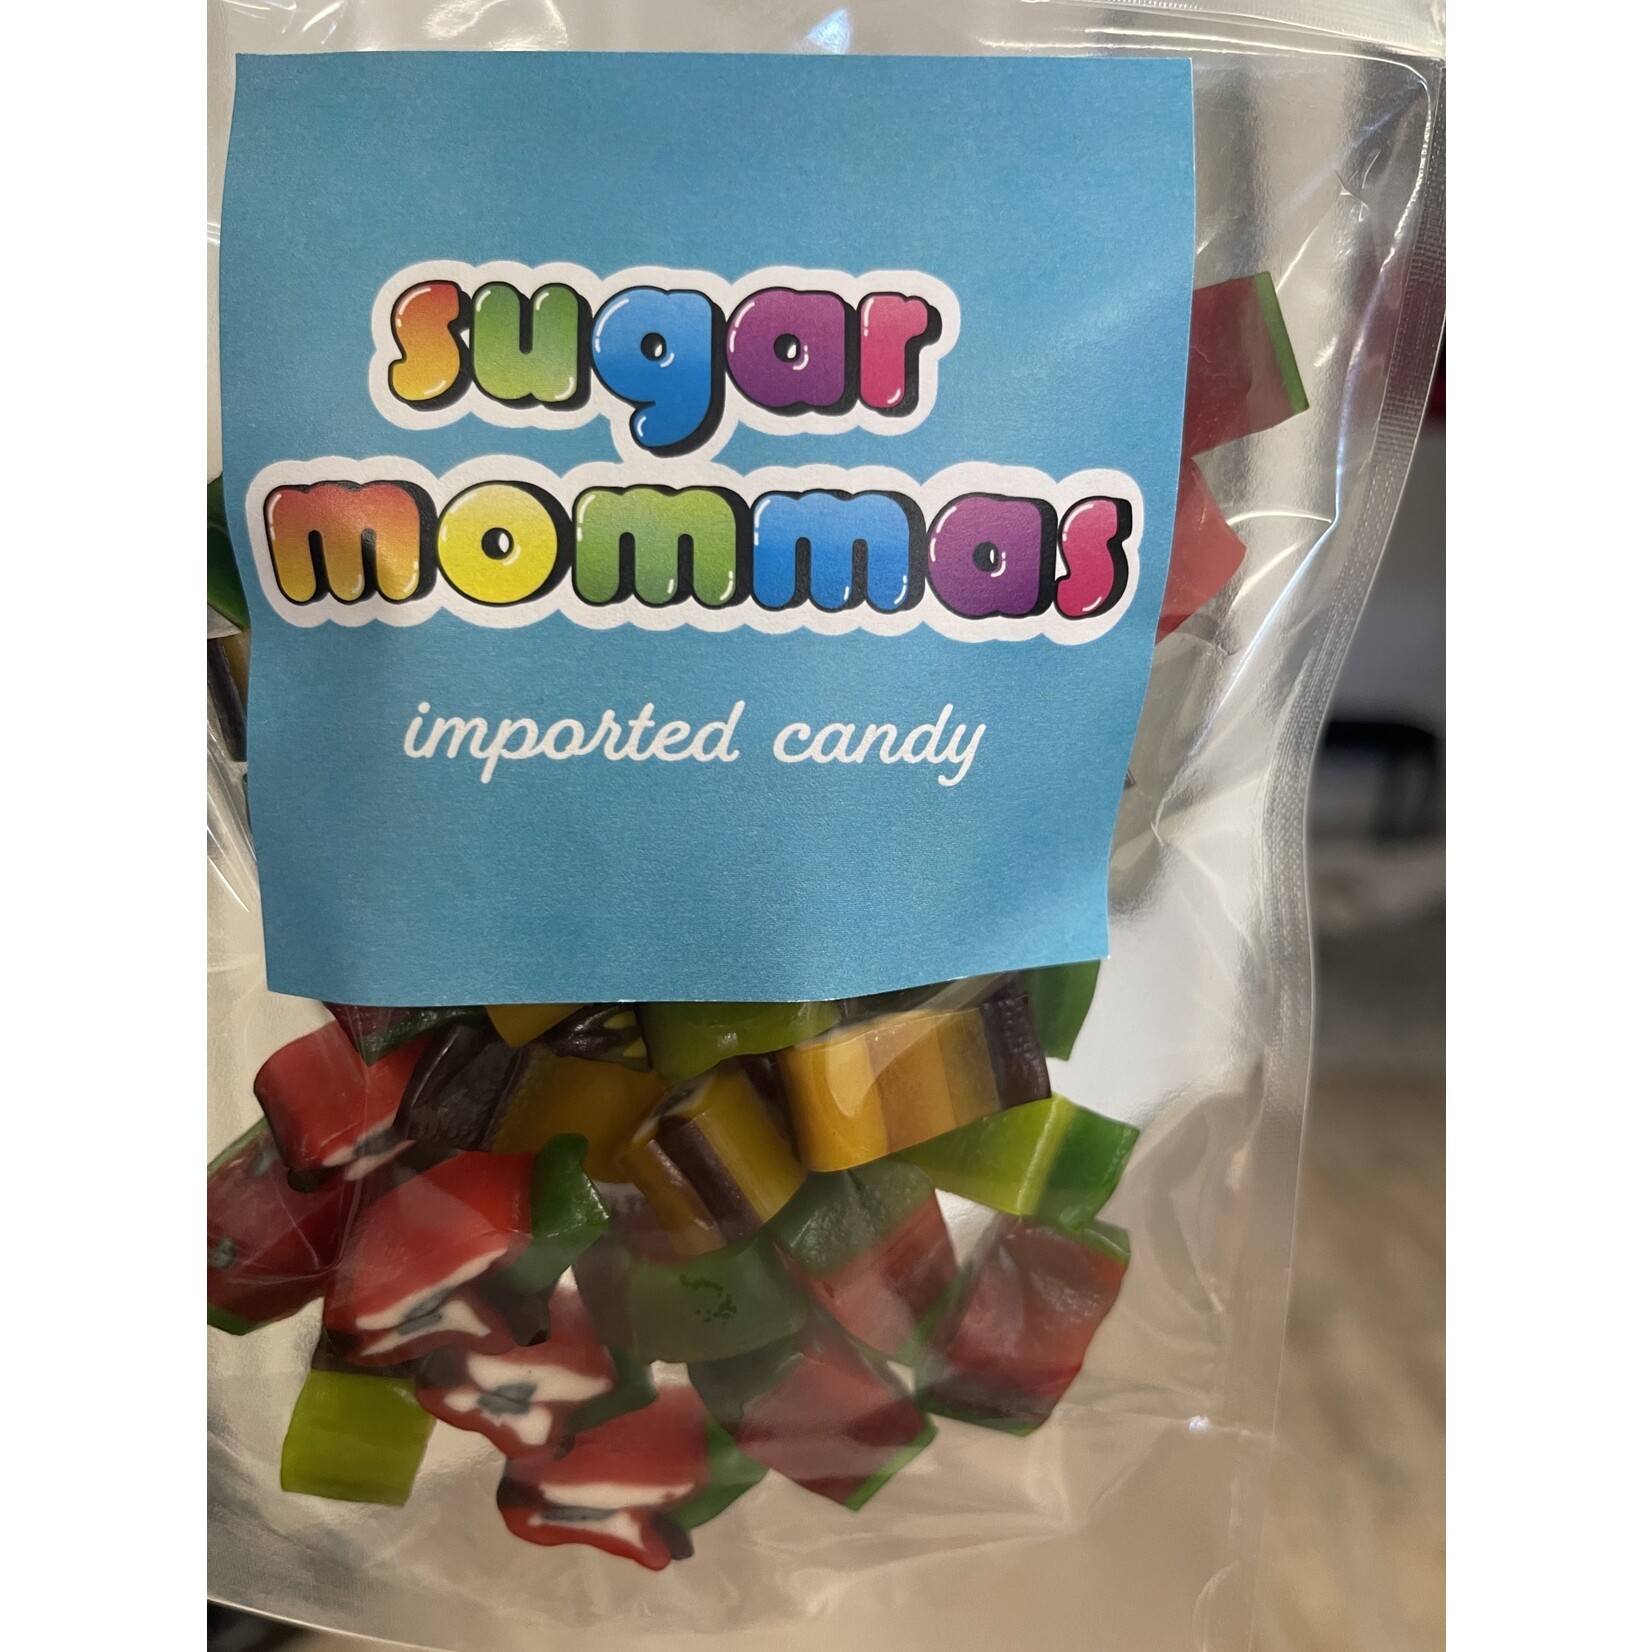 Sugar Momma's Sugar Mommas Imported Candy Selection